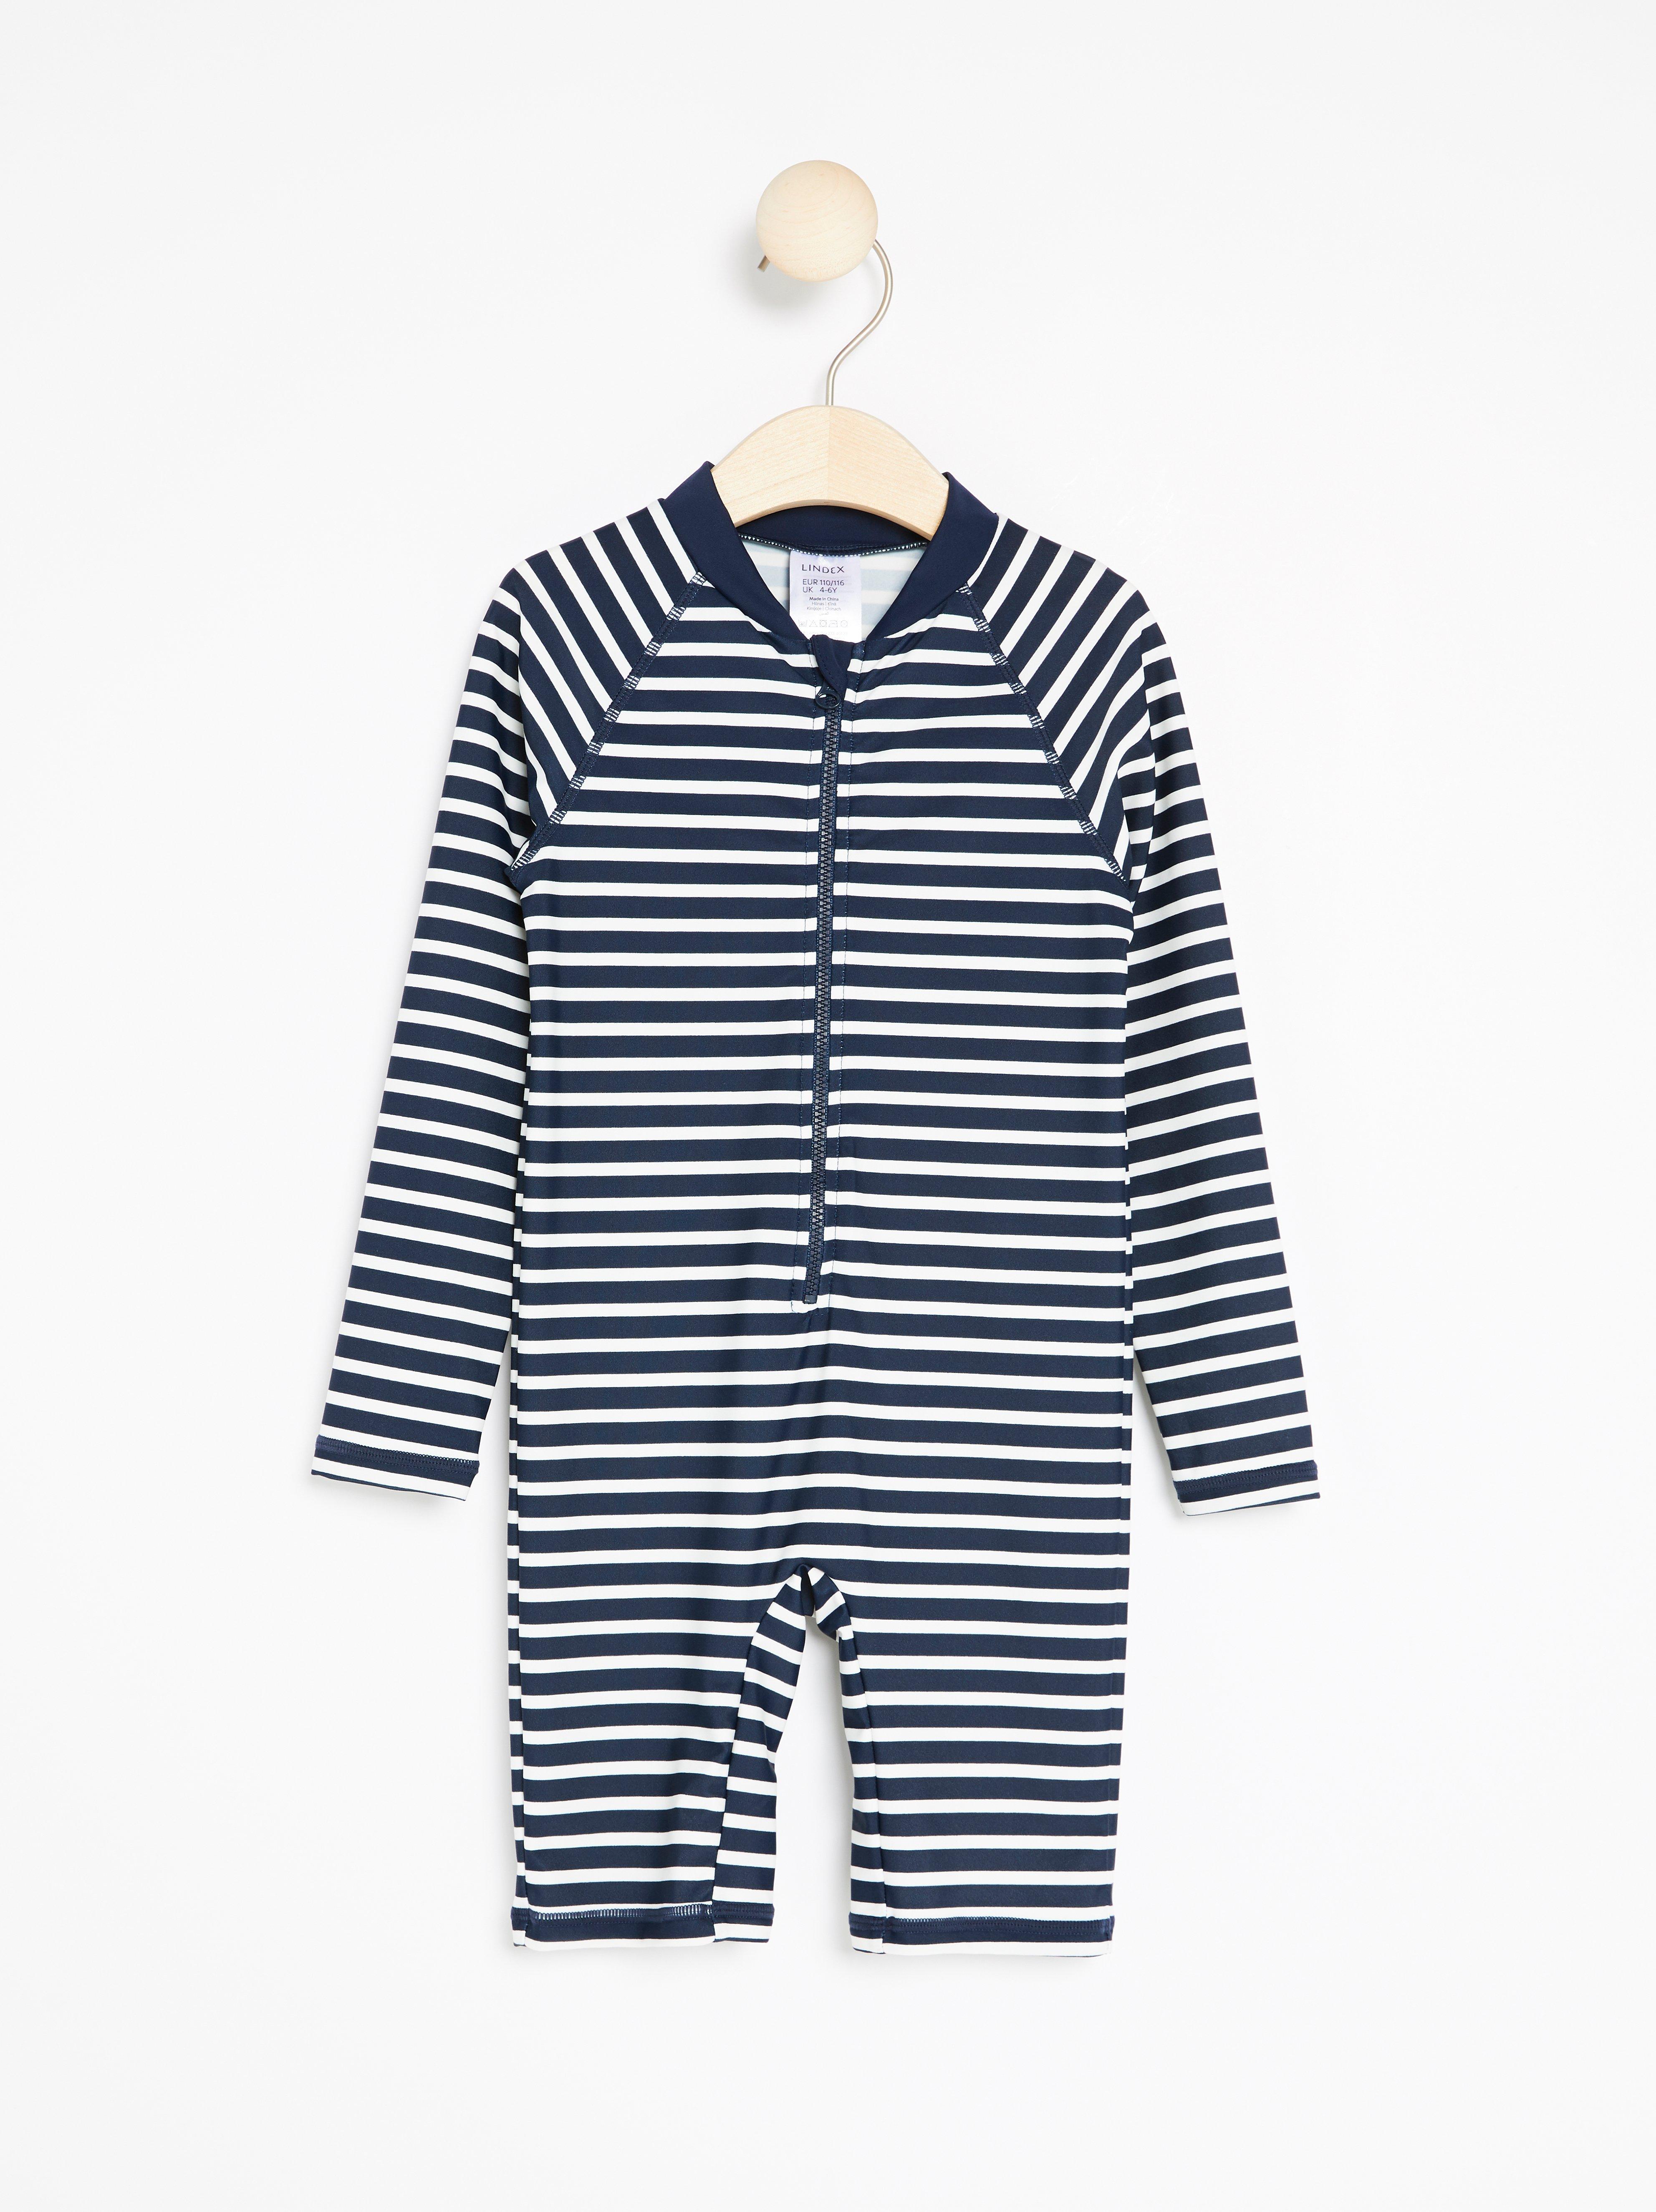 Striped sun protection suit with UPF 50+ | Lindex UK